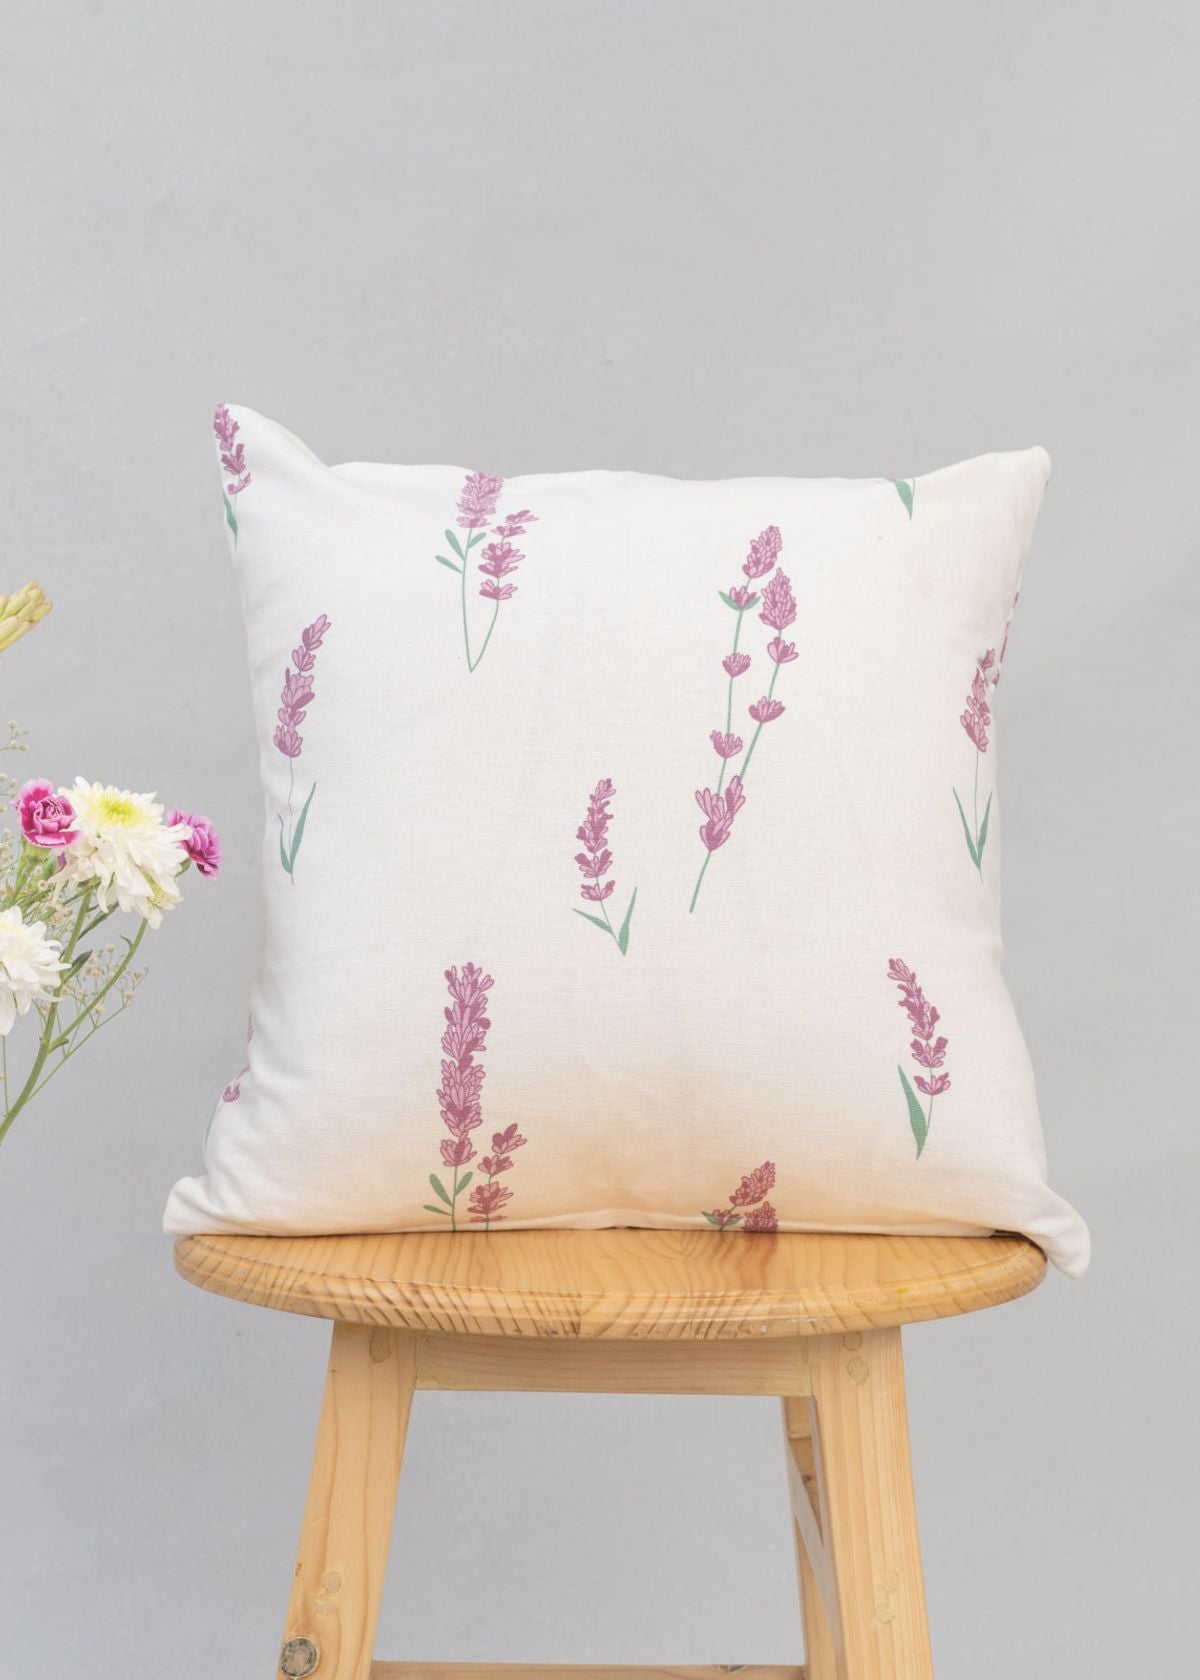 Fields Printed 100% cotton floral cushion cover for sofa - Lavender